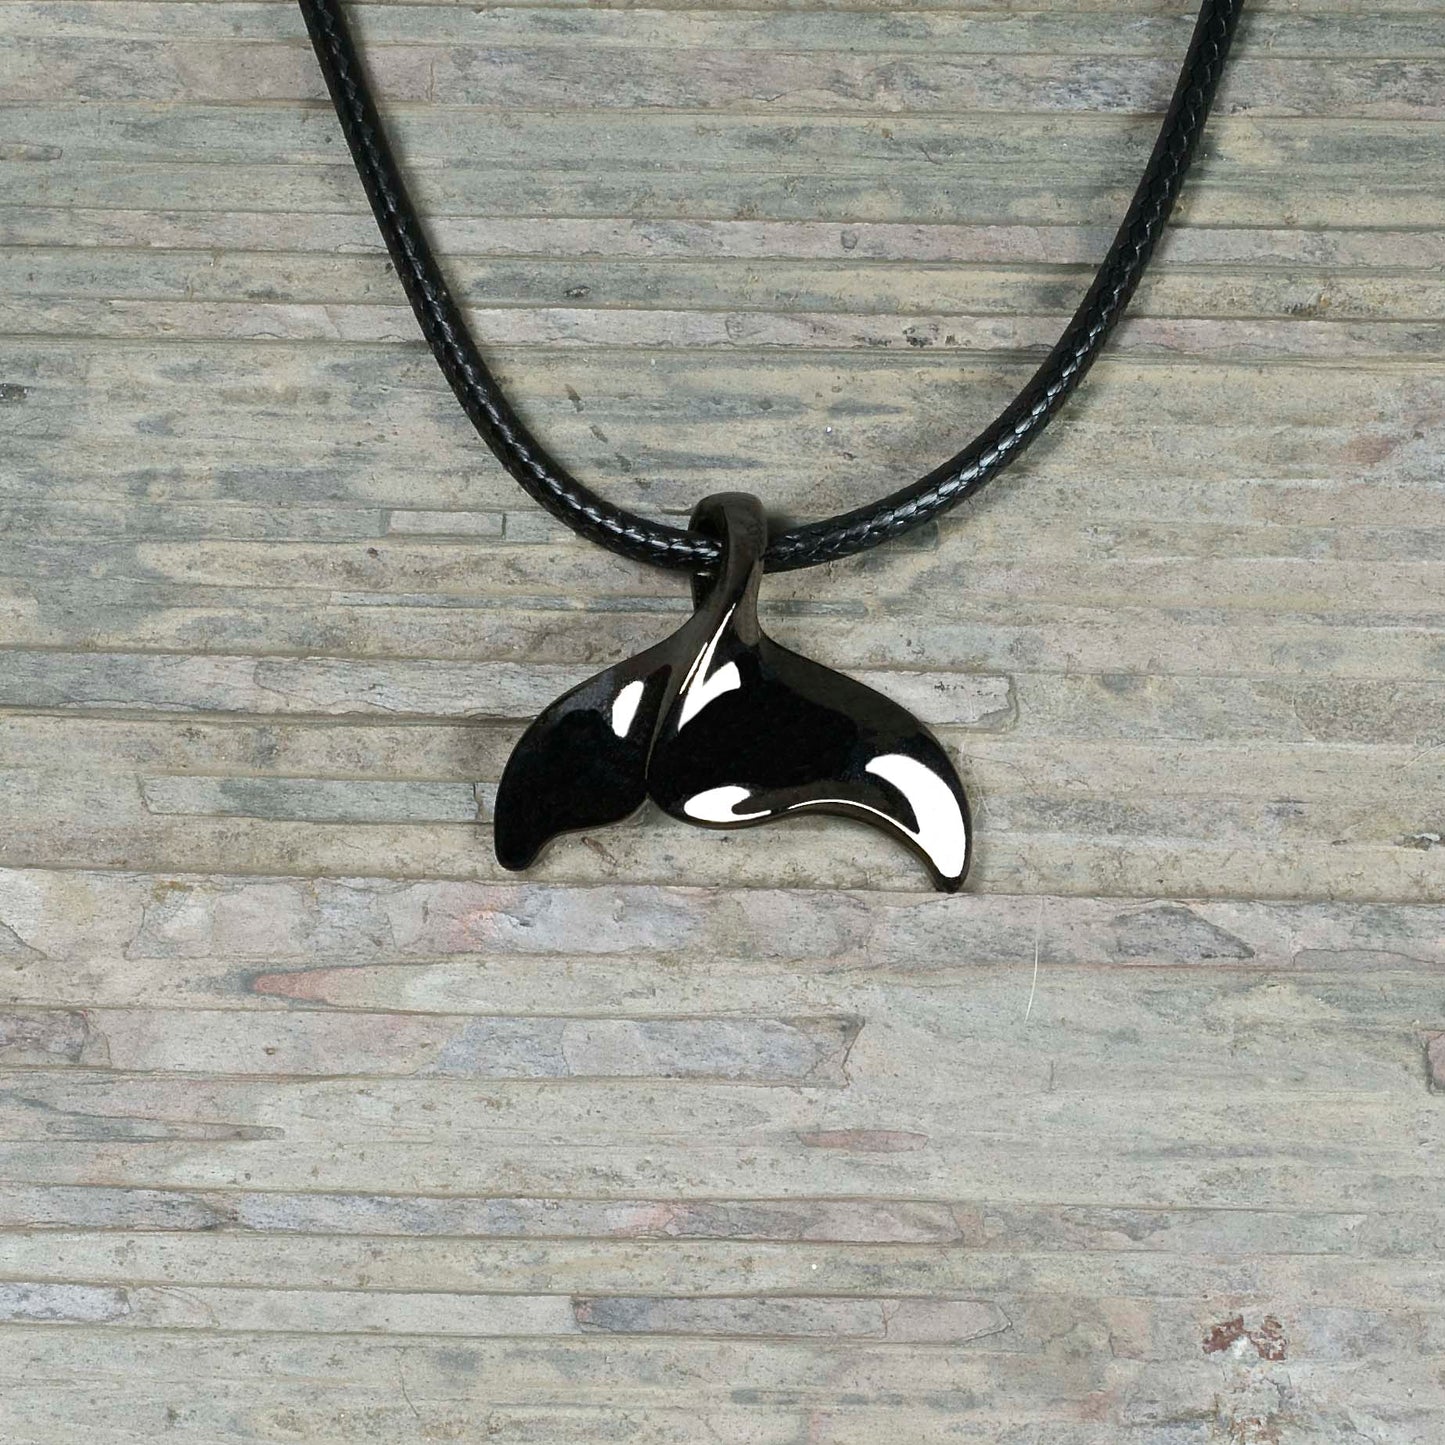 Whale Tail Necklace Hematite- Whale Fluke Black Pendant, Whale Watching Gift, Jet Black Whale Fluke Necklace, Gifts for Whale Lovers, Fluke Charm - The Tool Store